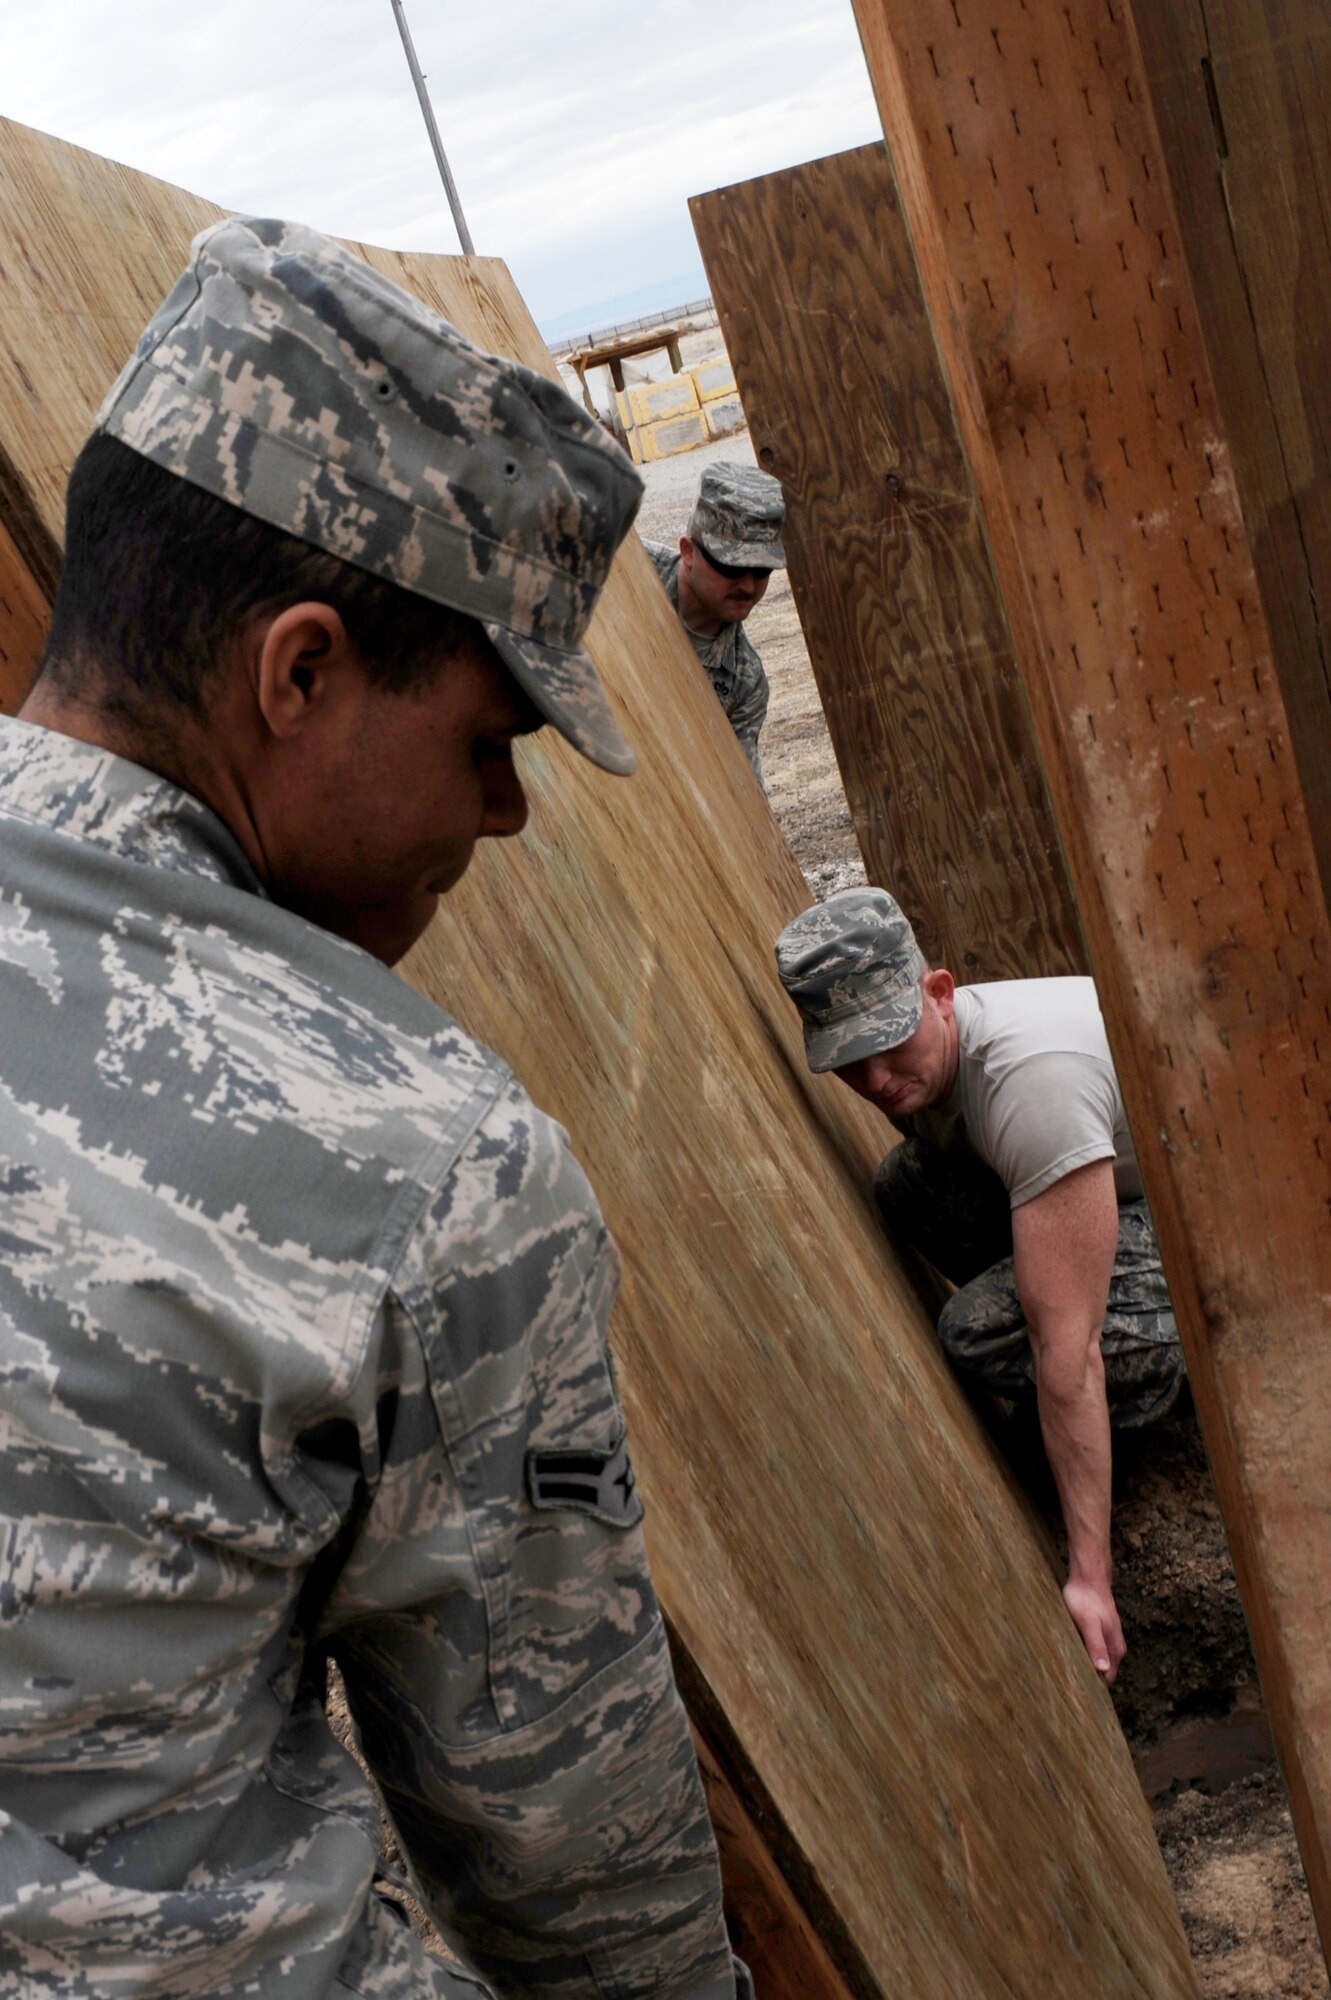 U.S. Air Force Airman 1st Class Nathan Coleman, Staff Sgt. Chris Carpenter and Staff Sgt. Kyle McCloskey, 366th Civil Engineer Squadron structures technicians, put in place a revetment wall at a simulated deployed location, Mountain Home Air Force Base, Idaho, April 1, 2013. The walls of the revetment need to be located close to the asset without being inaccessible.  (U.S. Air Force photo/Staff Sgt. Roy Lynch) (Released)